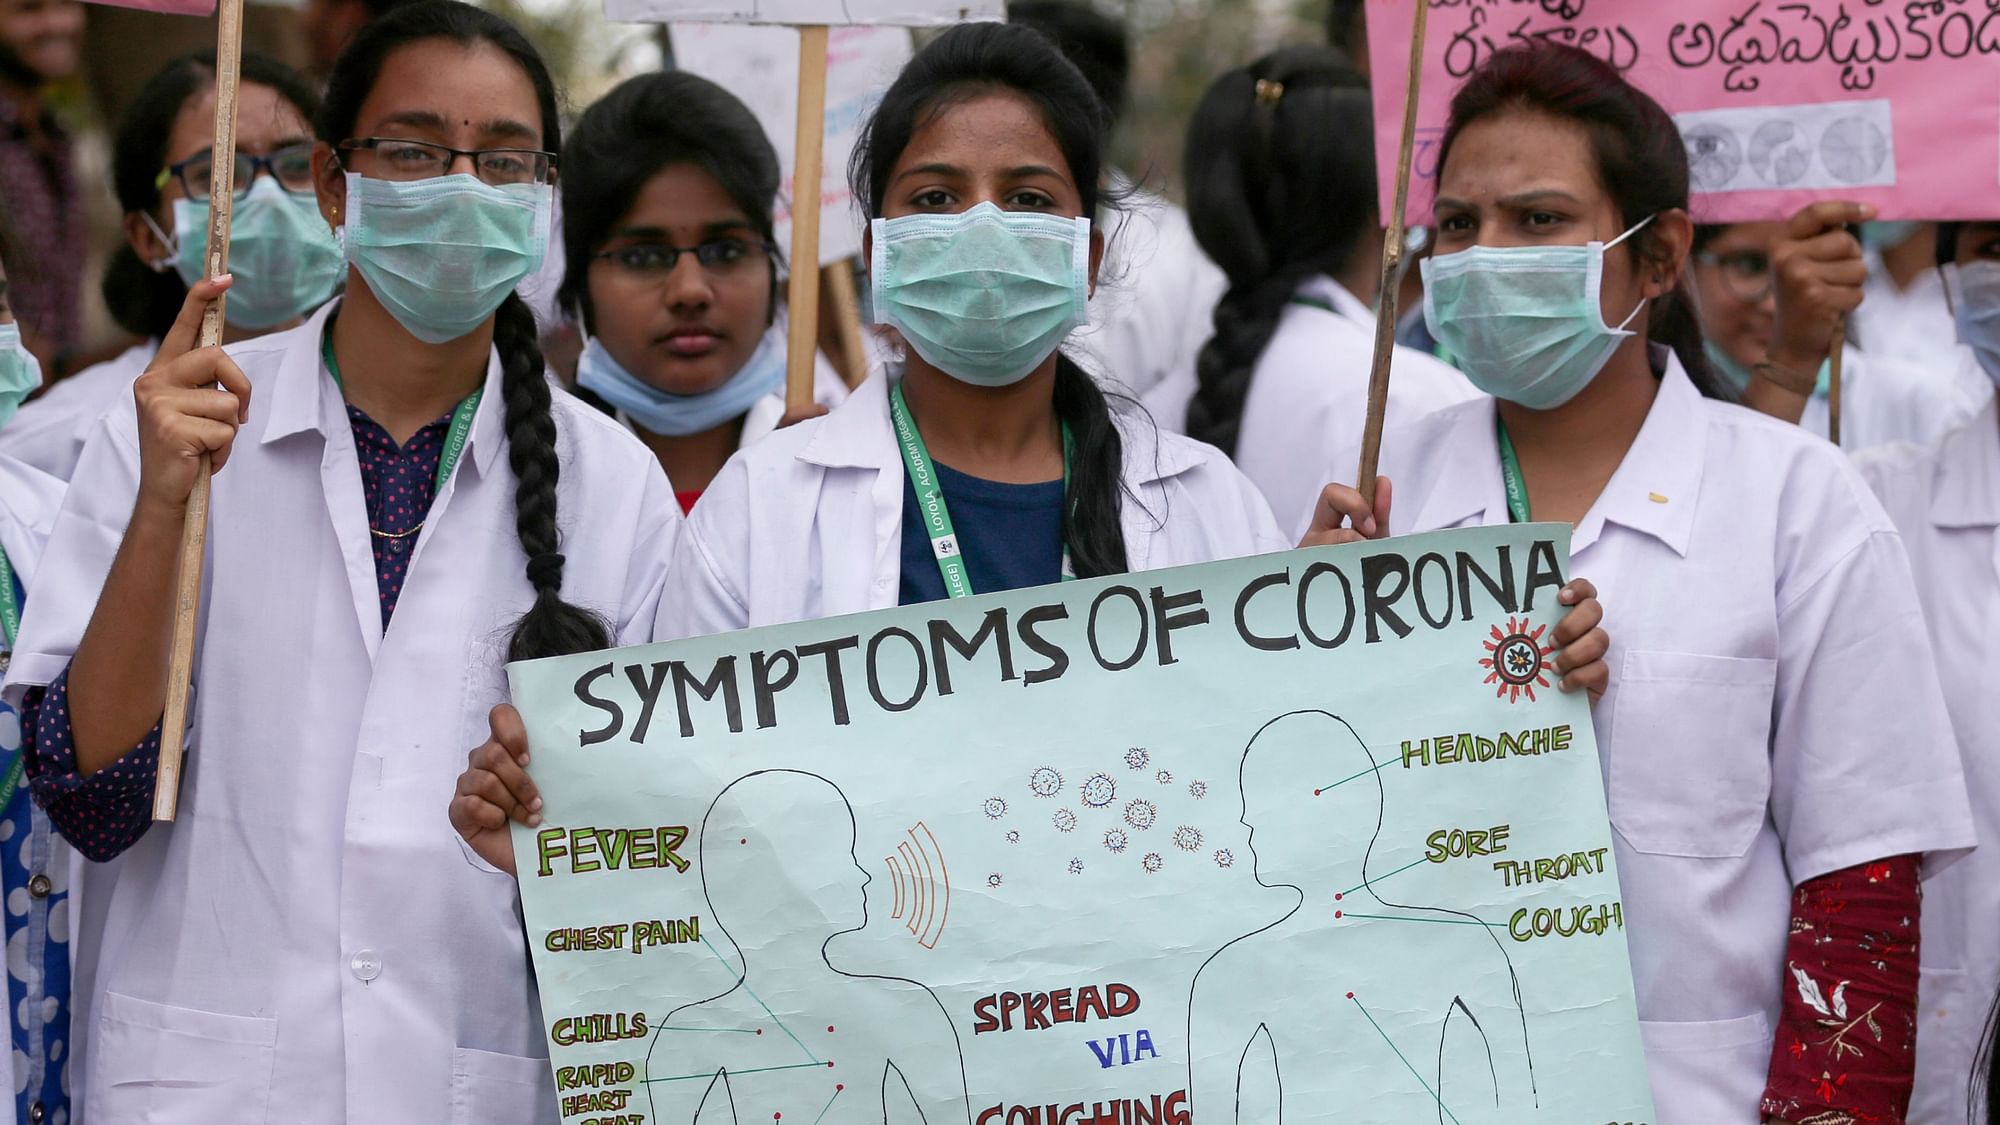 Indian students hold a placard during an awareness rally for COVID-19 in Hyderabad, India on Friday, 6 March 2020.